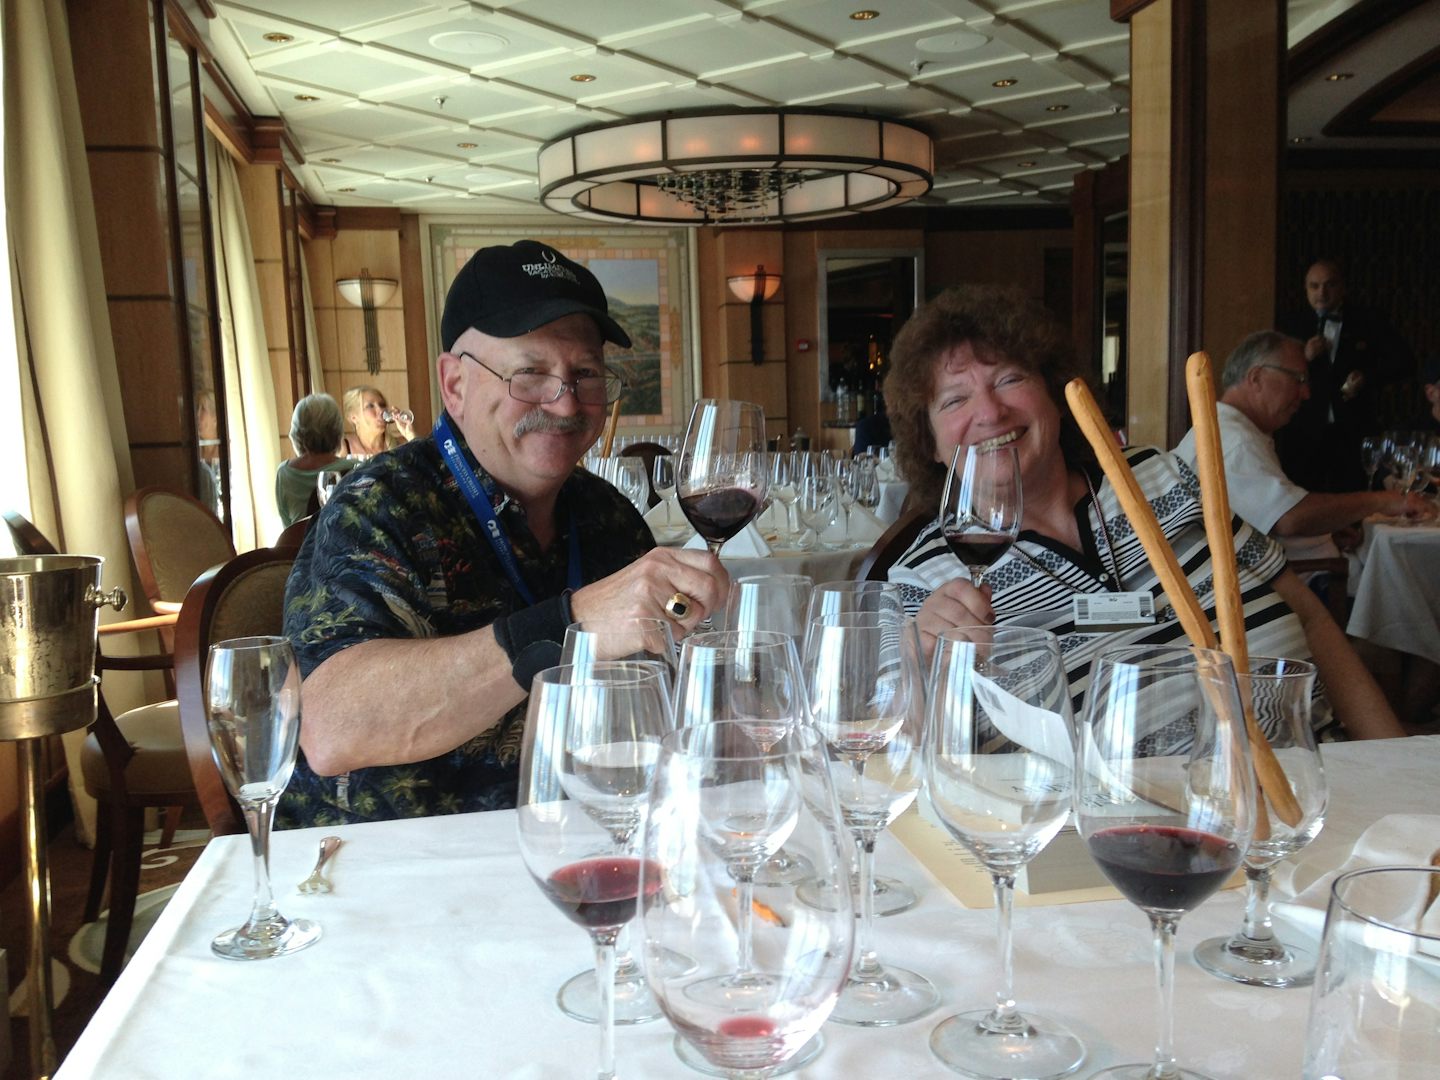 Wine tasting with our traveling companions on board. Great food pairings